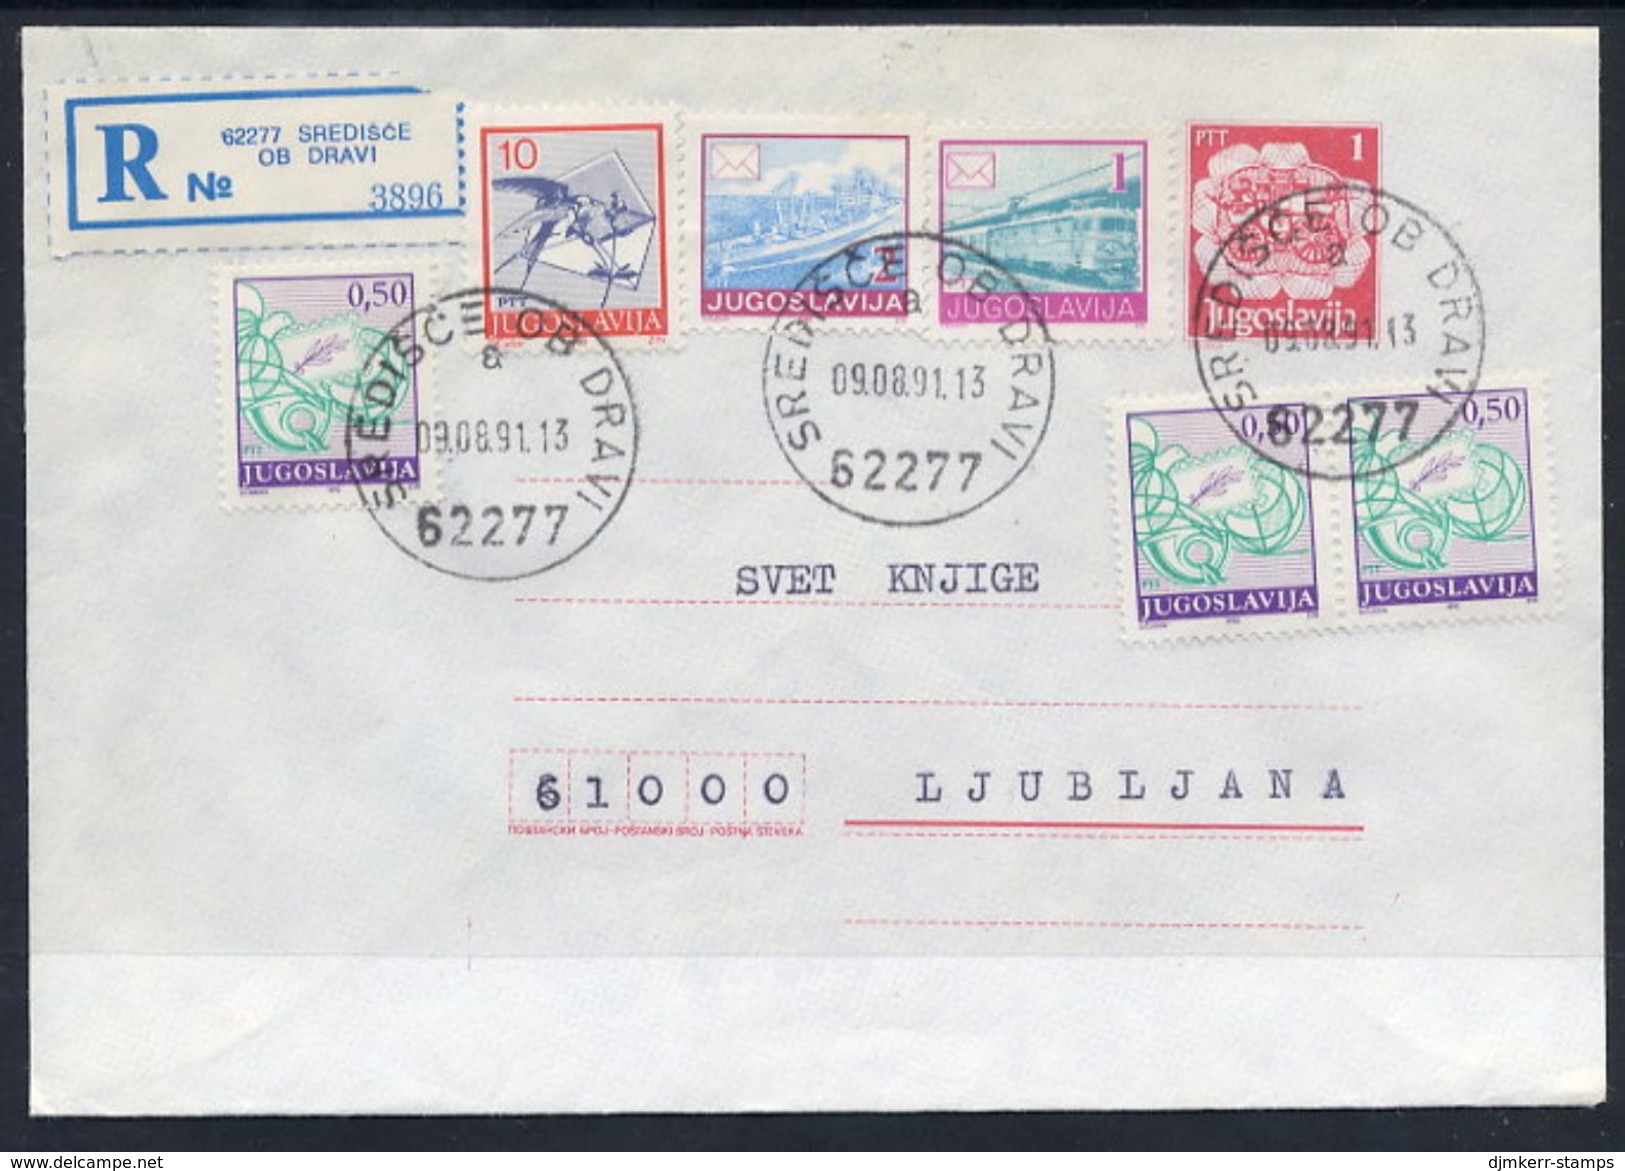 YUGOSLAVIA 1990 Mailcoach 1 D. Stationery Envelope Used With Additional Franking.  Michel U95 - Entiers Postaux